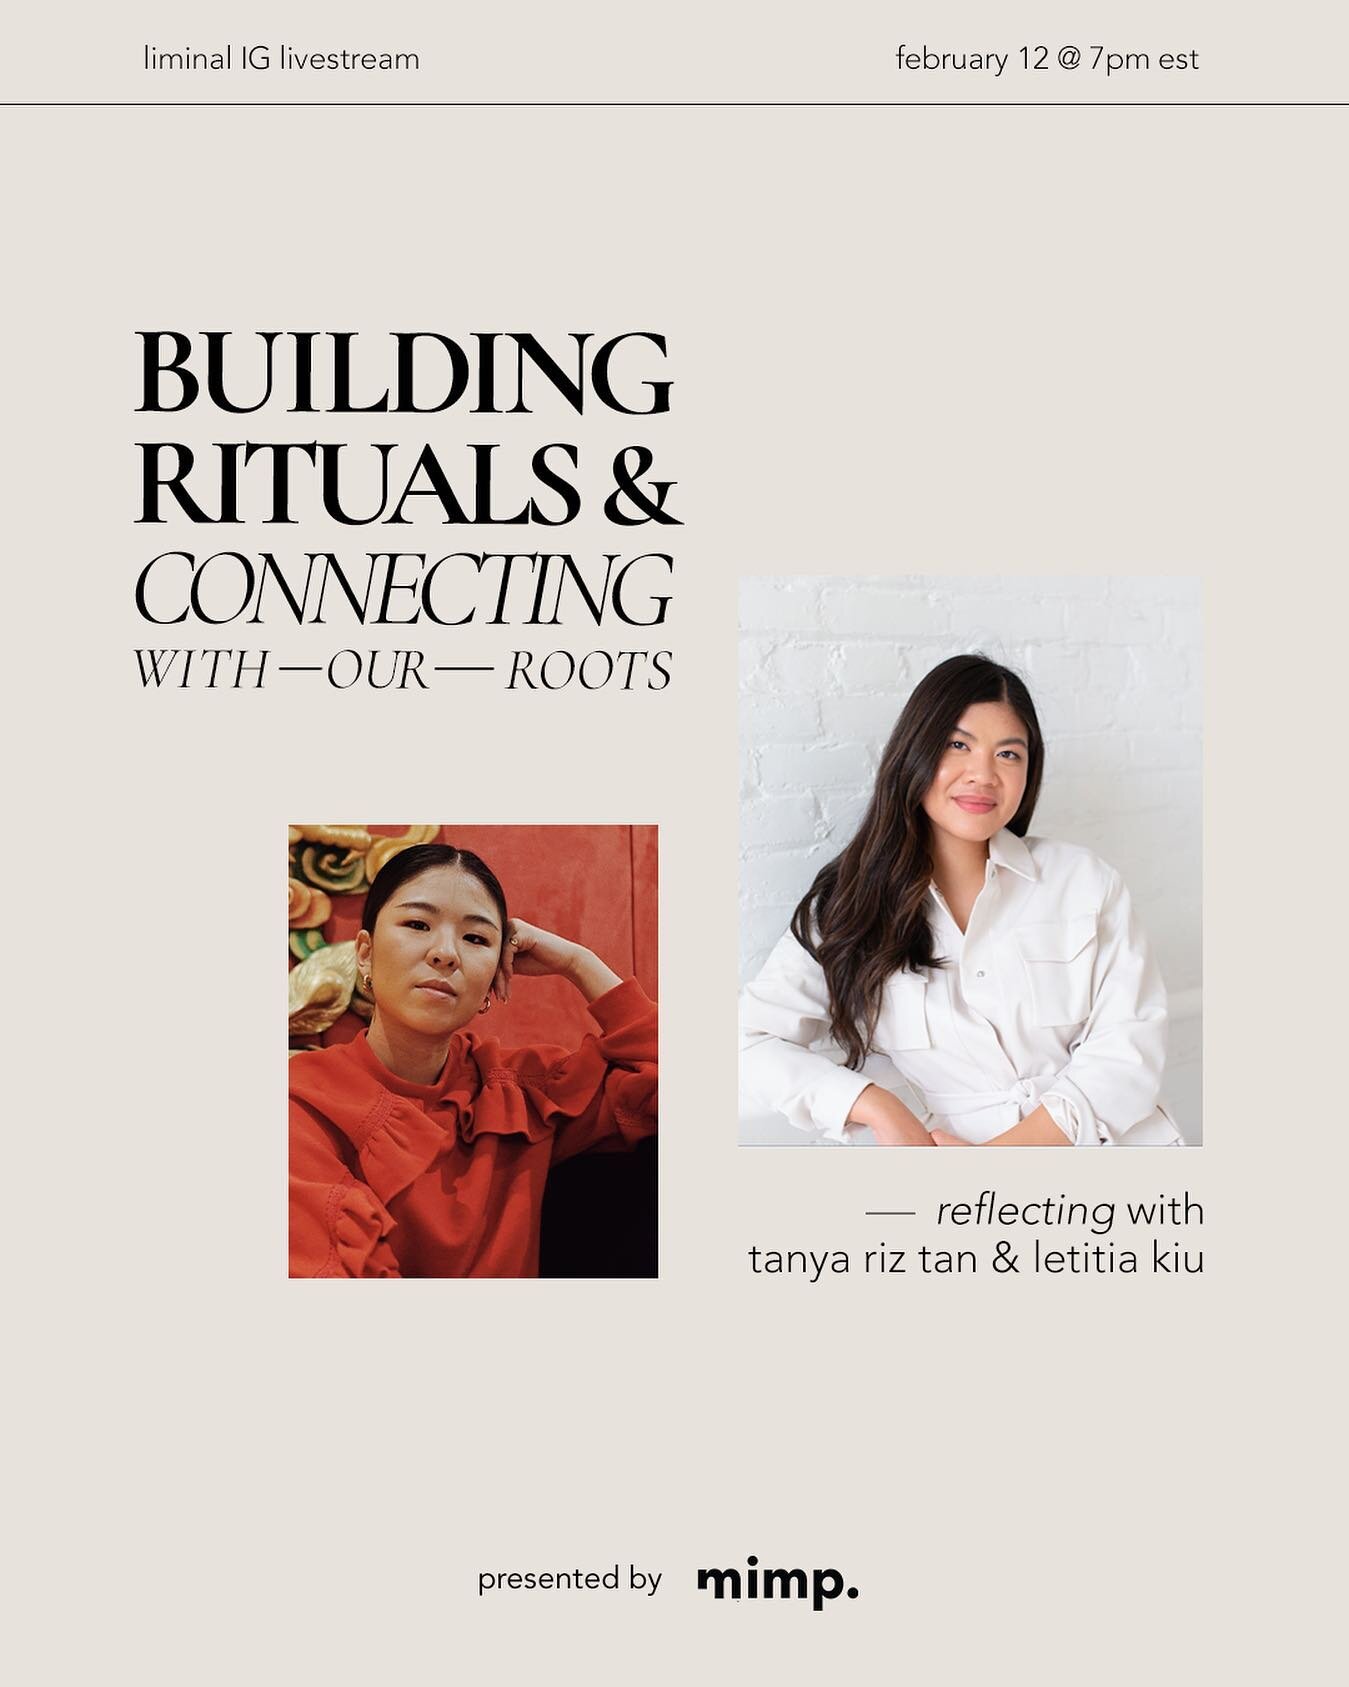 Happy (almost) Lunar New Year!🧧 In celebration of Lunar New Year, join us for a conversation with @metangebeauty founder, Tanya Riz Tan, around building rituals and connecting with our roots &mdash; facilitated by YouTuber @letitiakiu. 

For those o